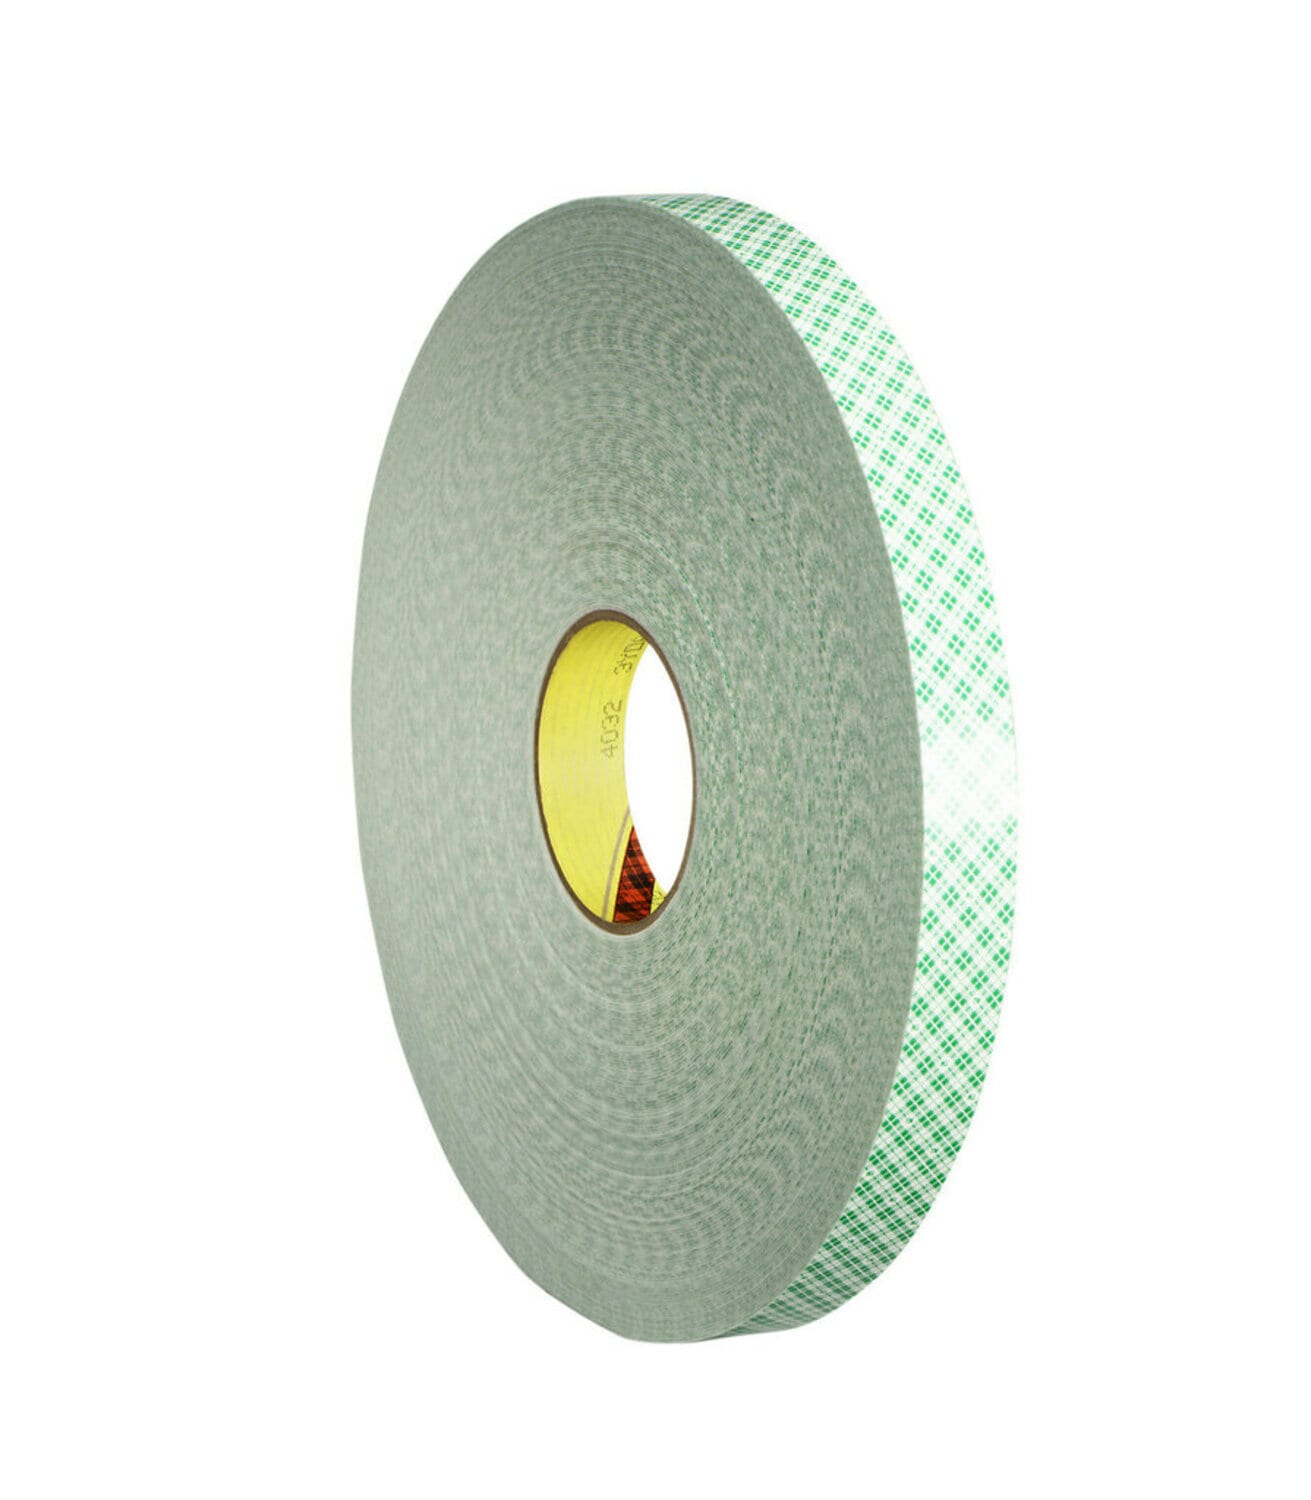 https://www.e-aircraftsupply.com/ItemImages/22/62293E_3m-double-coated-urethane-foam-tape-4032.jpg